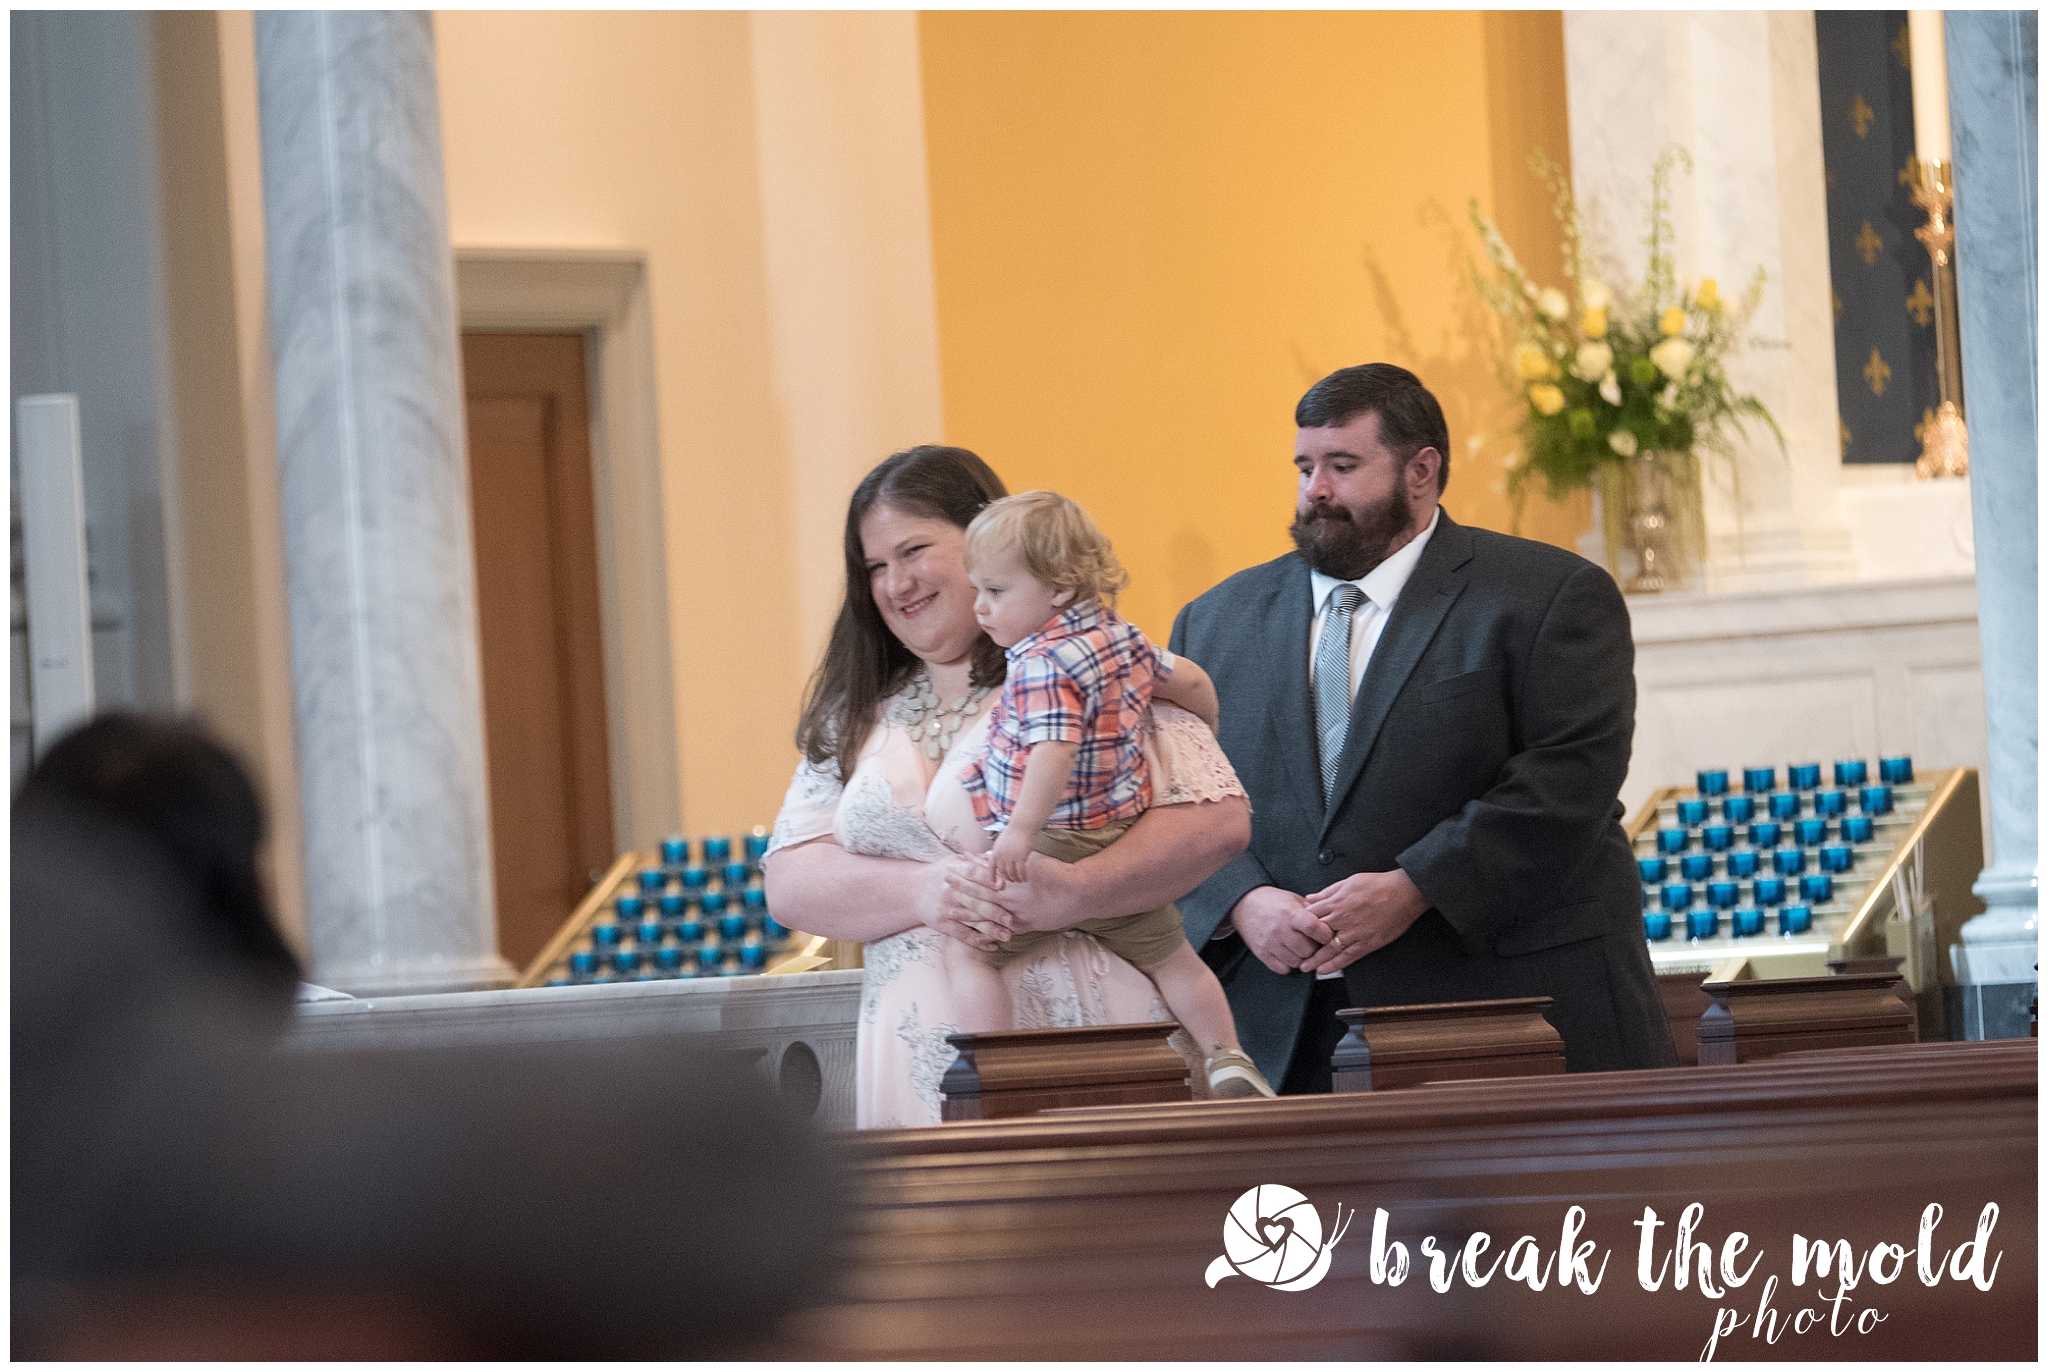 wedding-knoxville-sacred-heart-cathedral-photographer-break-the-mold-photo-feature-affordable_0797.jpg